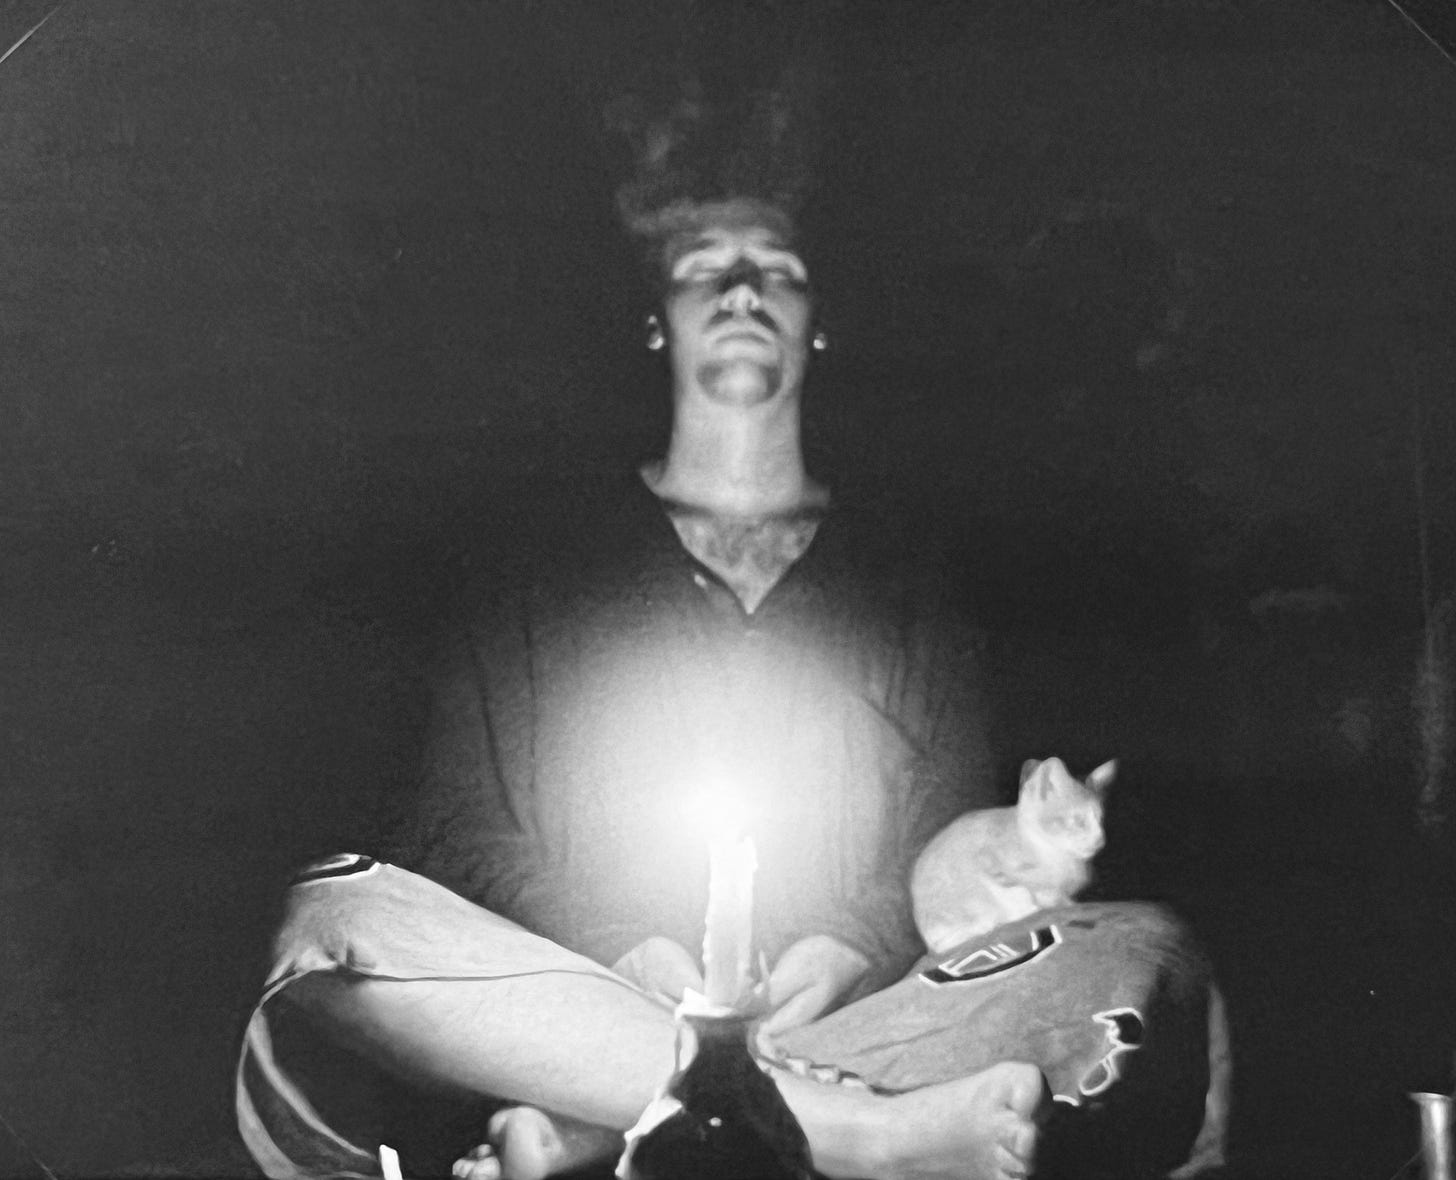 A black-and-white photograph of me sat meditating in a sarong in front of a candle stuck in the top of a bottle burning in the dark. On my left knee, a kitten is dozing within my hands are placed within my lap. The photo was taken in an off grid, meditation retreat close to the cliff edge on the southern side of Penang island.